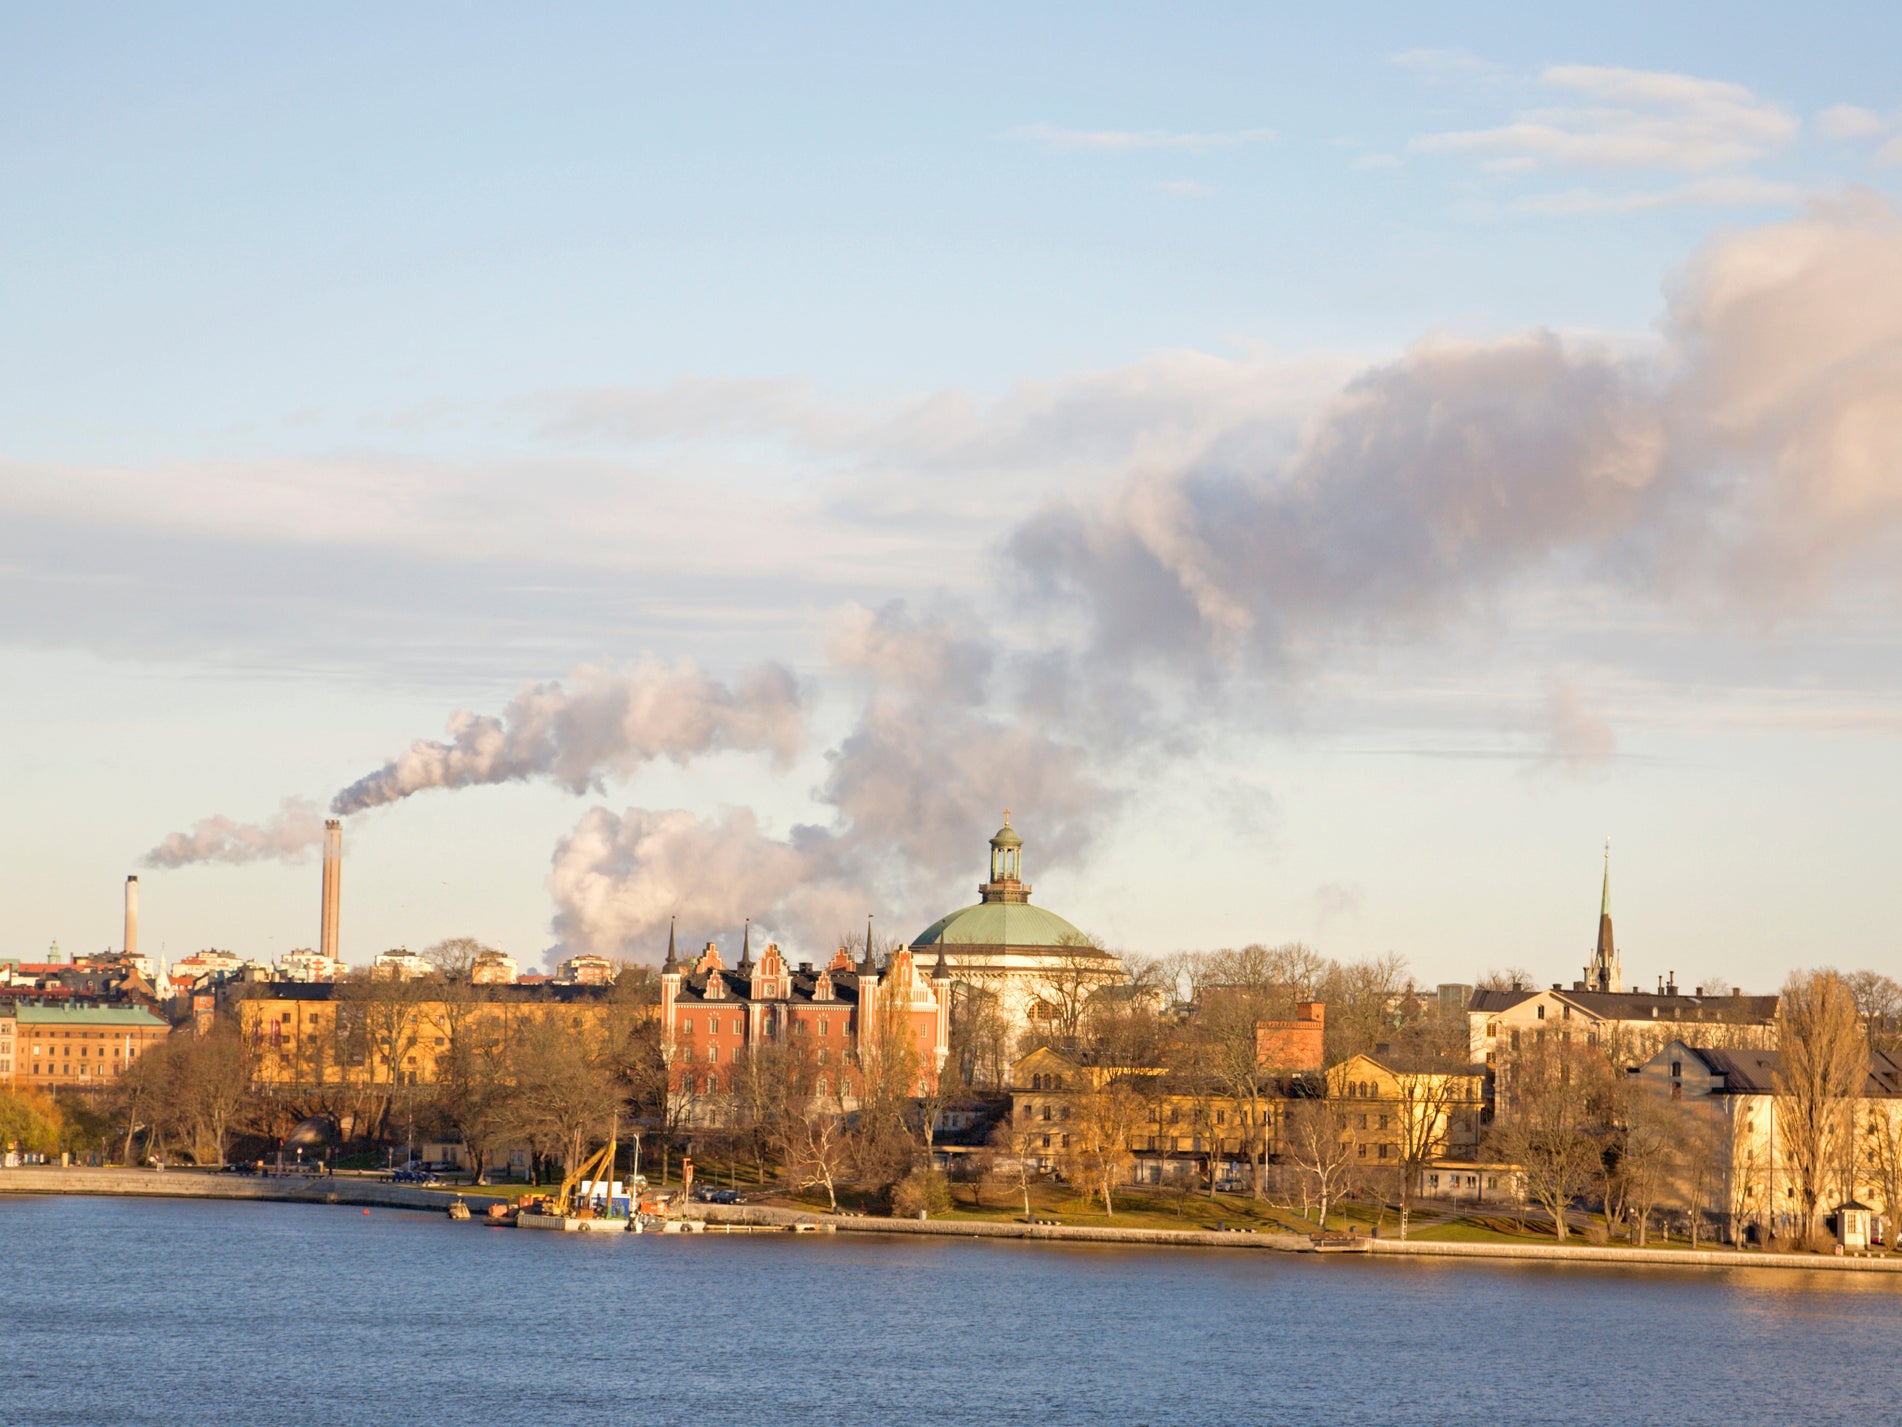 Findings made in Sweden where pollution levels are below EU safe limits